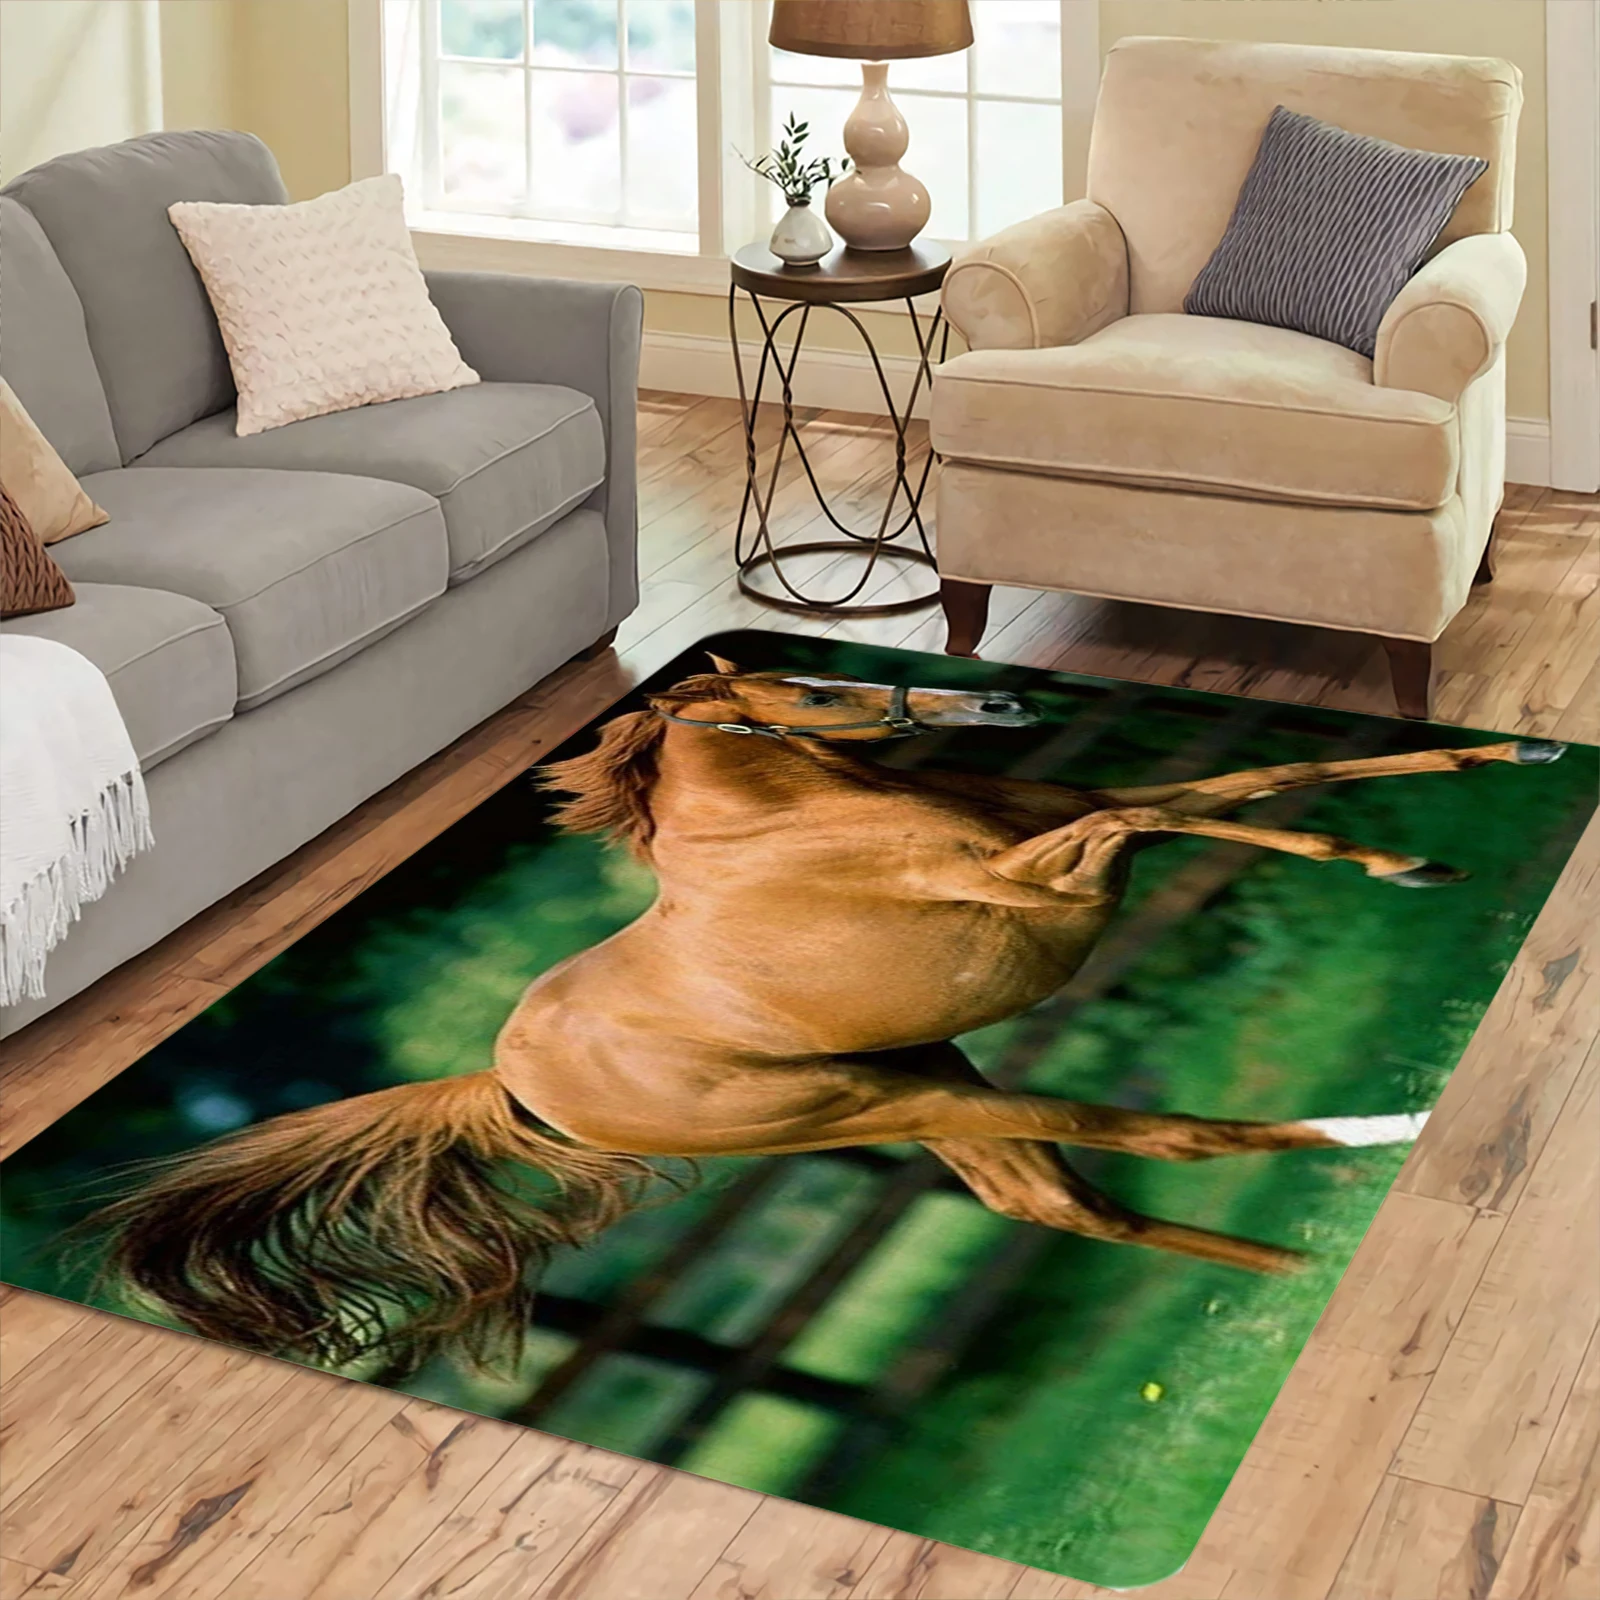 CLOOCL Animals Horse Carpets Fashion 3D Printed Flannel Floor Mats Carpet for Living Room Indoor Area Rugs Home Decor